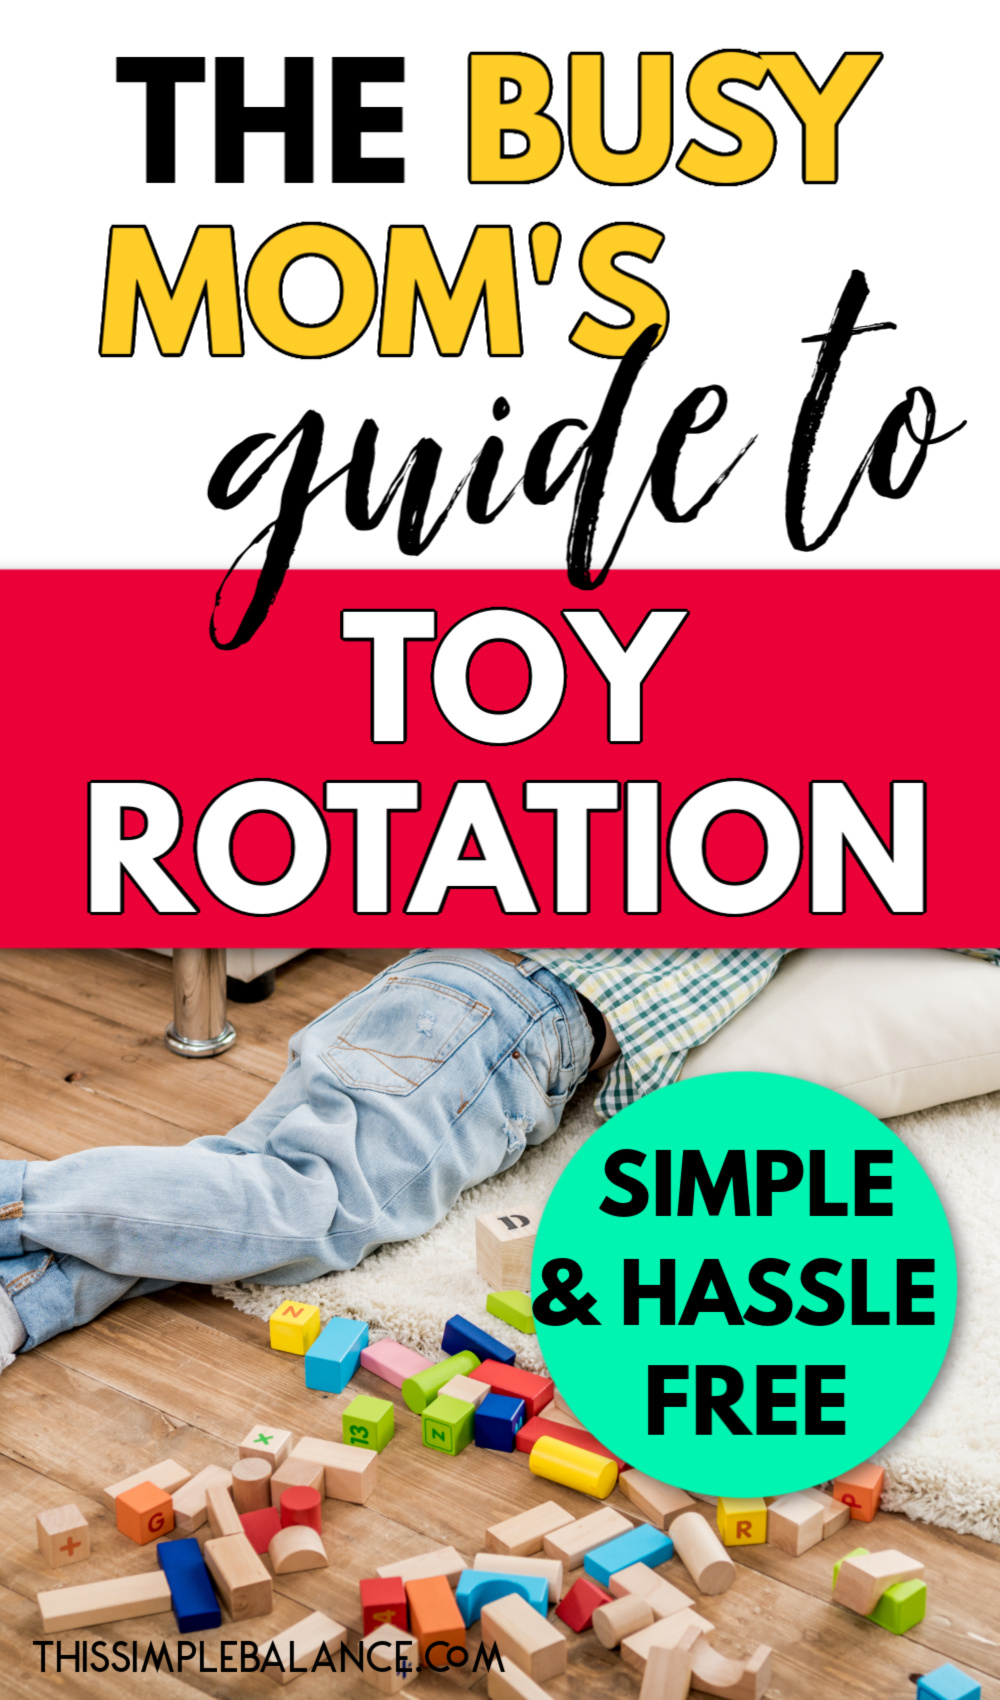 toys all over the floor with child laying on a pillow, with text overlay, "the busy mom's guide to toy rotation - simple & hassle free"